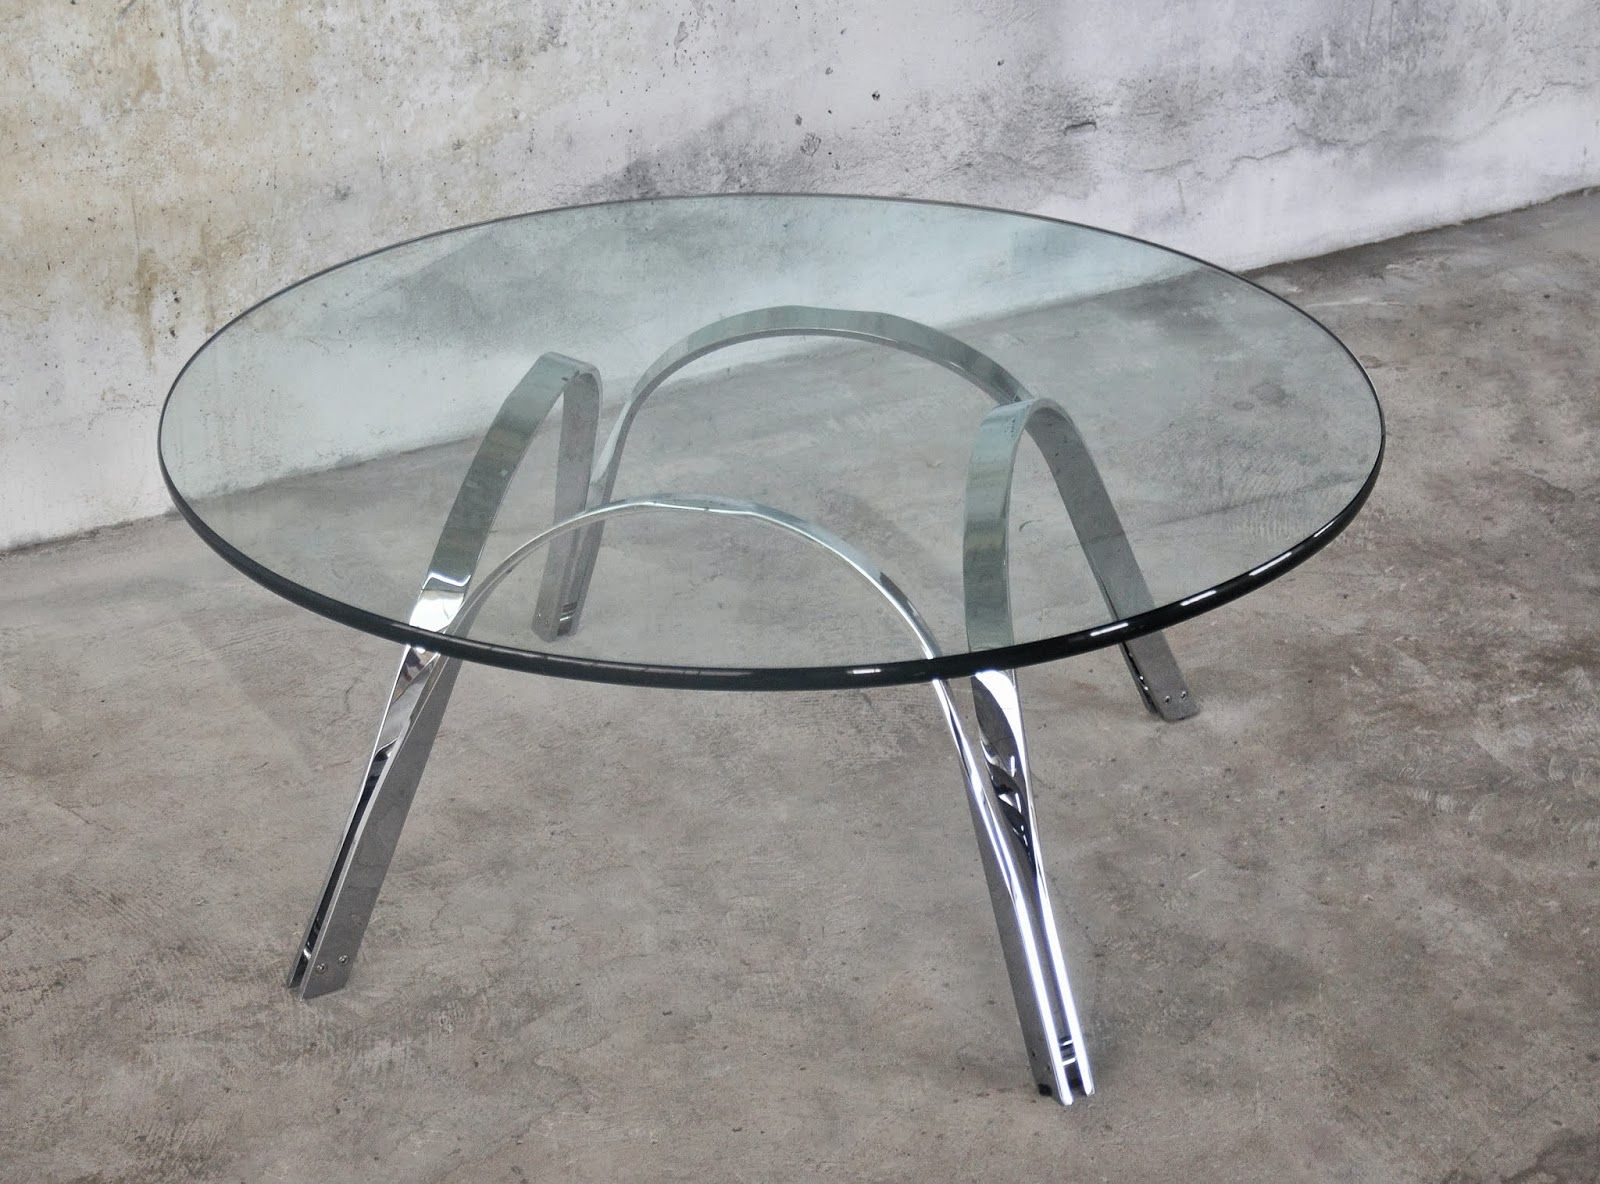 Polished Chrome Round Cocktail Tables With Regard To Well Liked Select Modern: Roger Sprunger Chrome & Glass Coffee Or Cocktail Table (View 8 of 10)